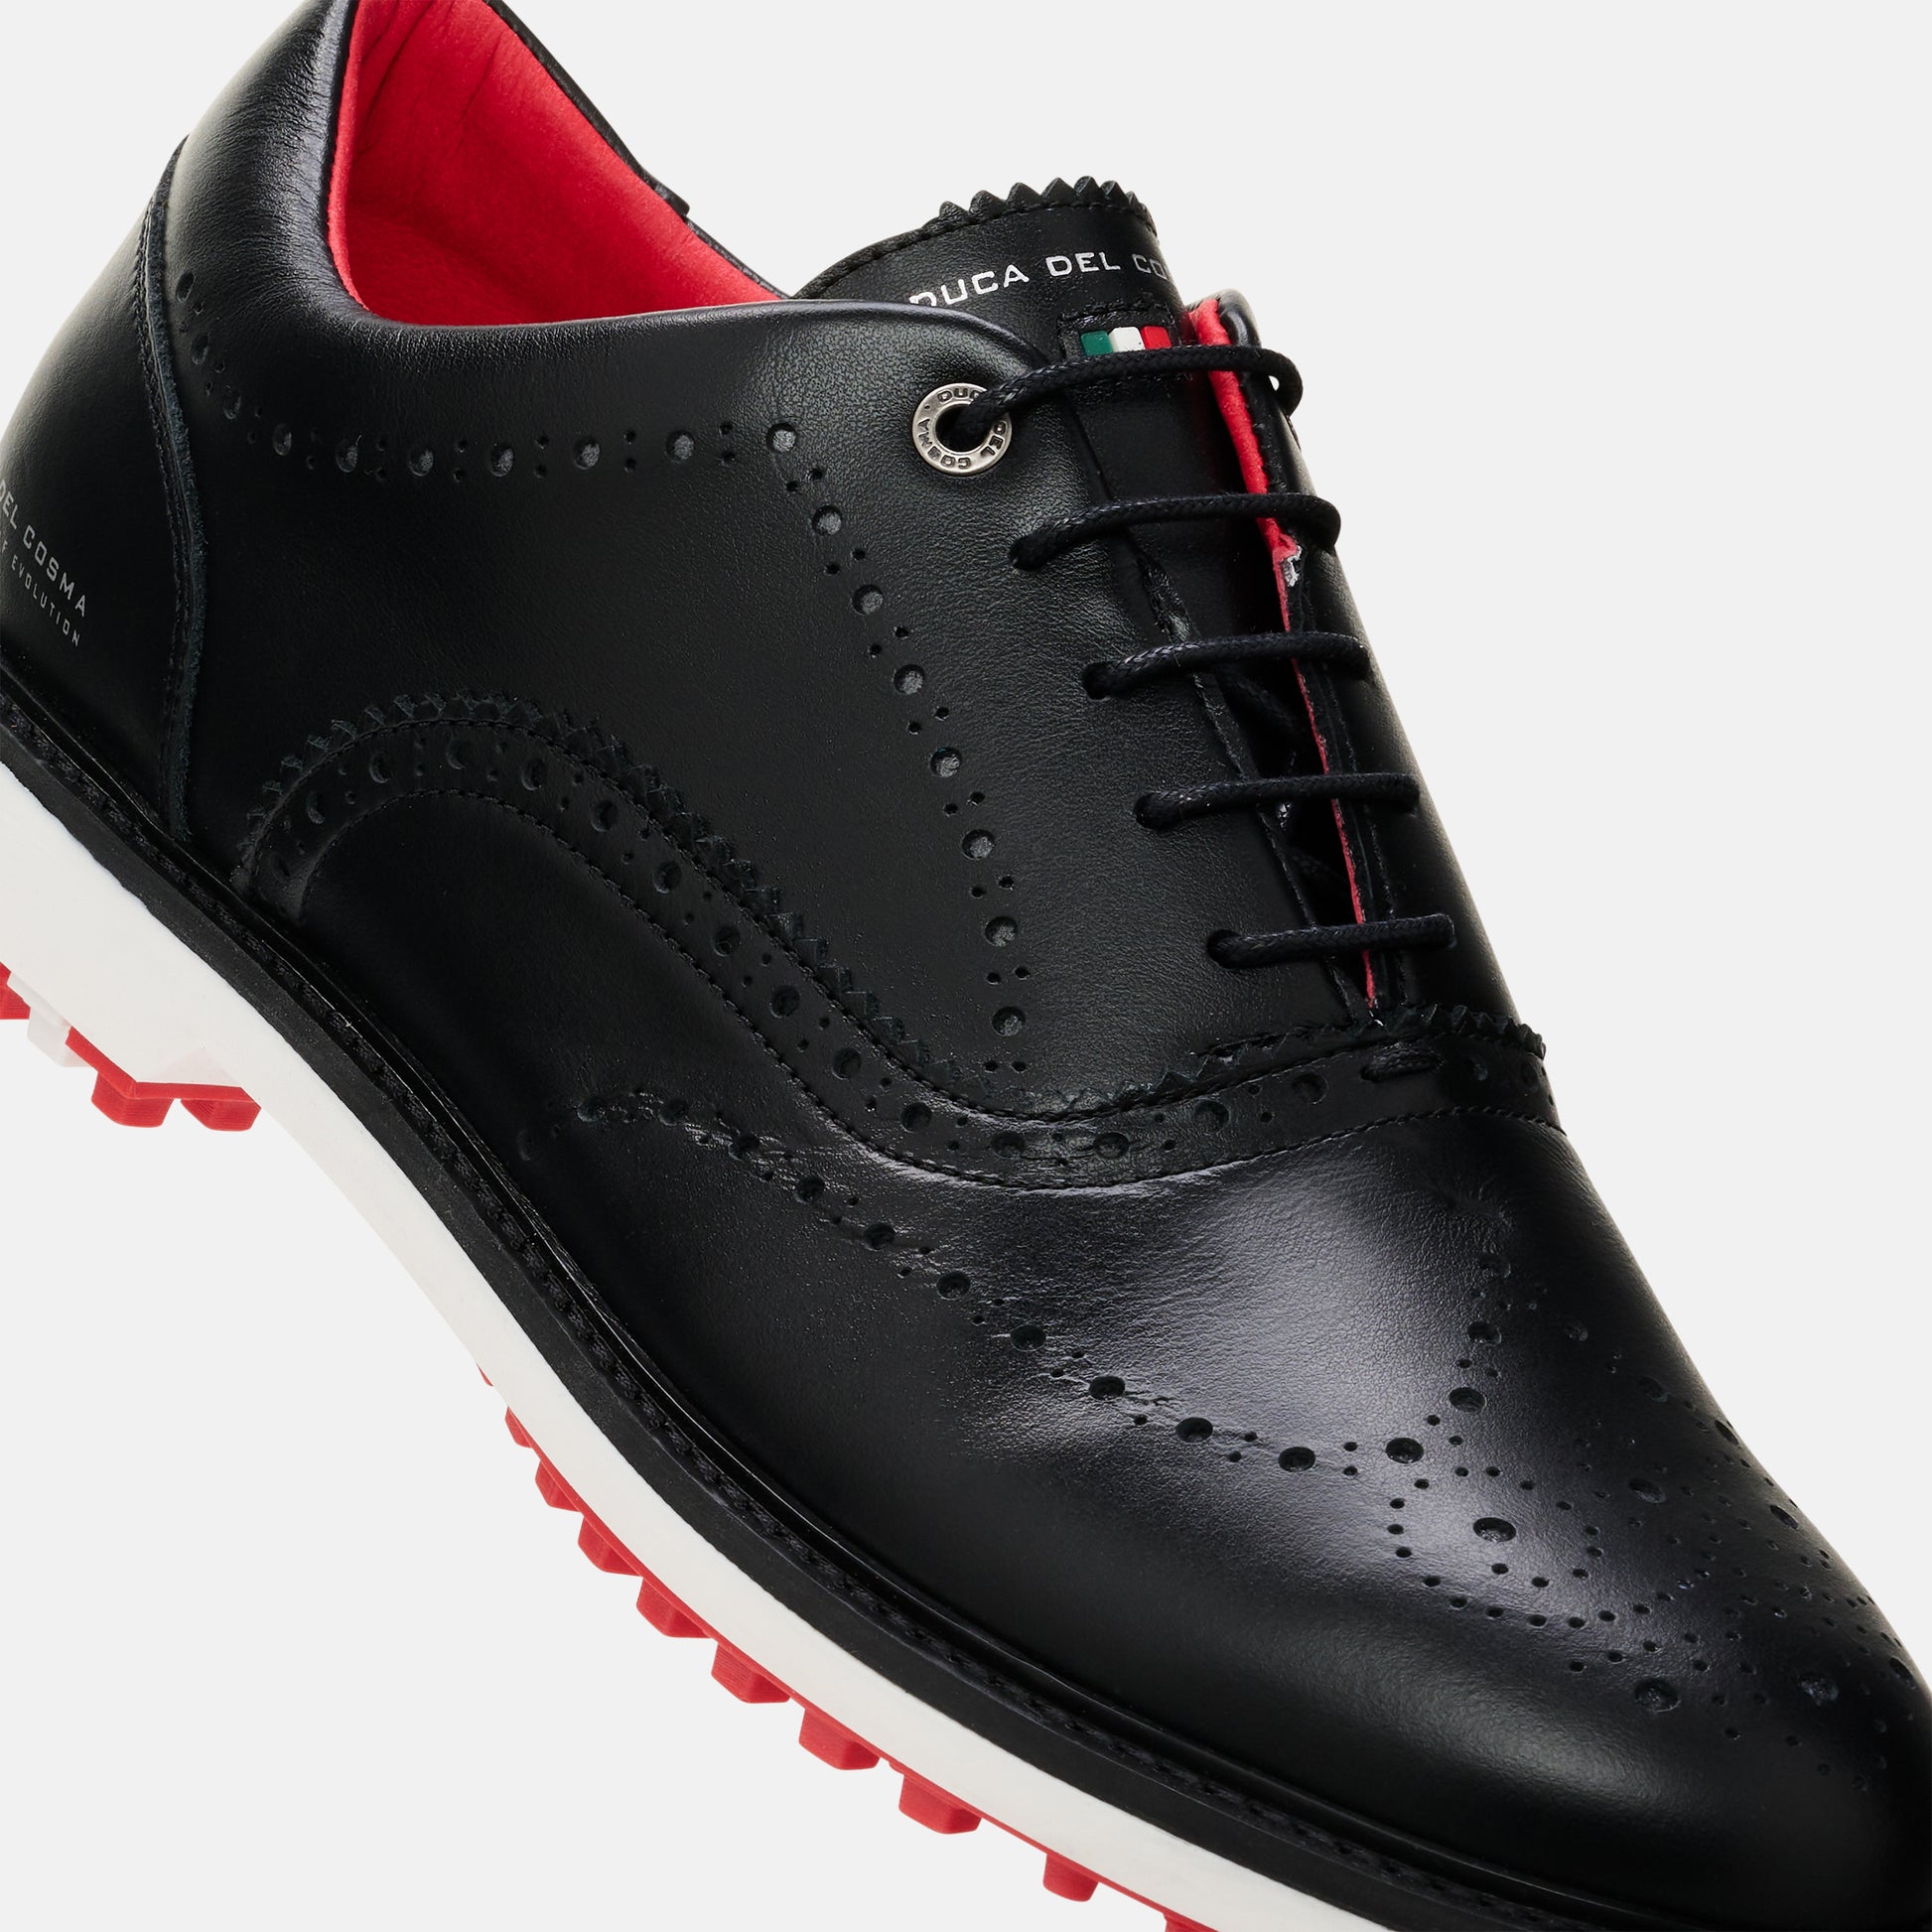 Black Golf Shoes, Waterproof Golf Shoes, Spikeless Golf Shoes, Duca del Cosma Men's Golf Shoes, Classic golf shoes.